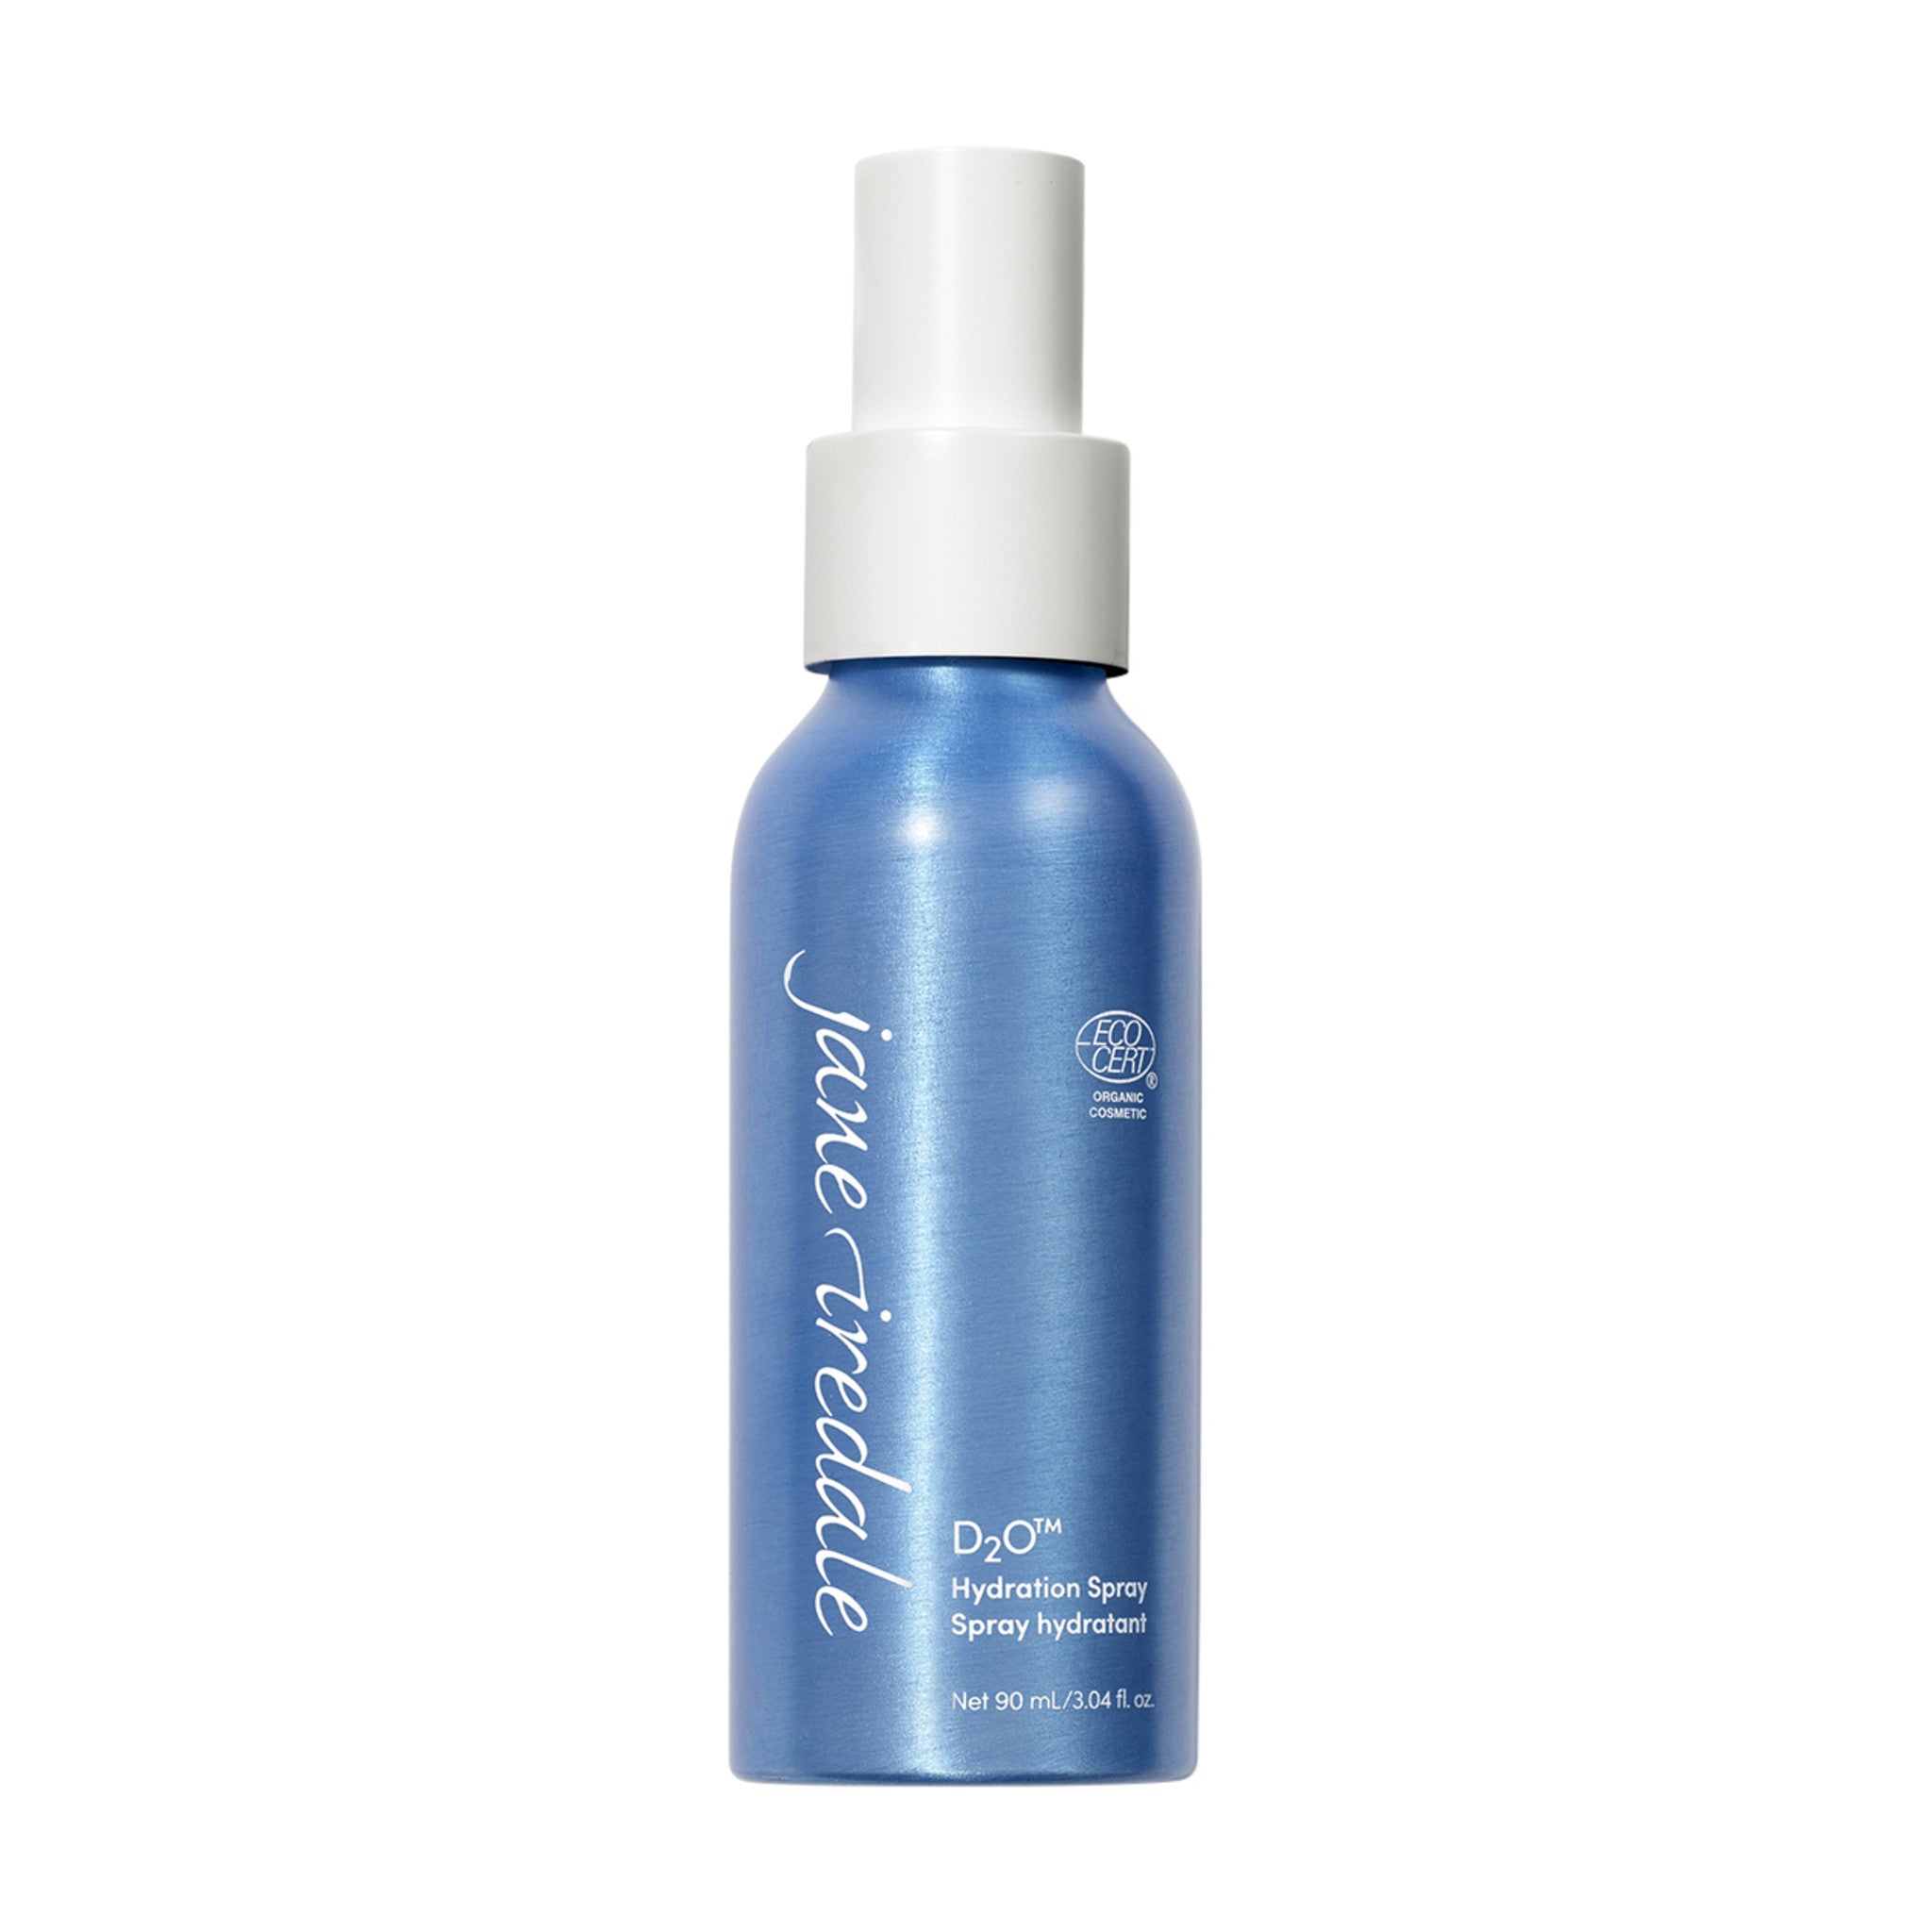 Jane Iredale D2O Hydration Spray Size variant: 90 ml main image.